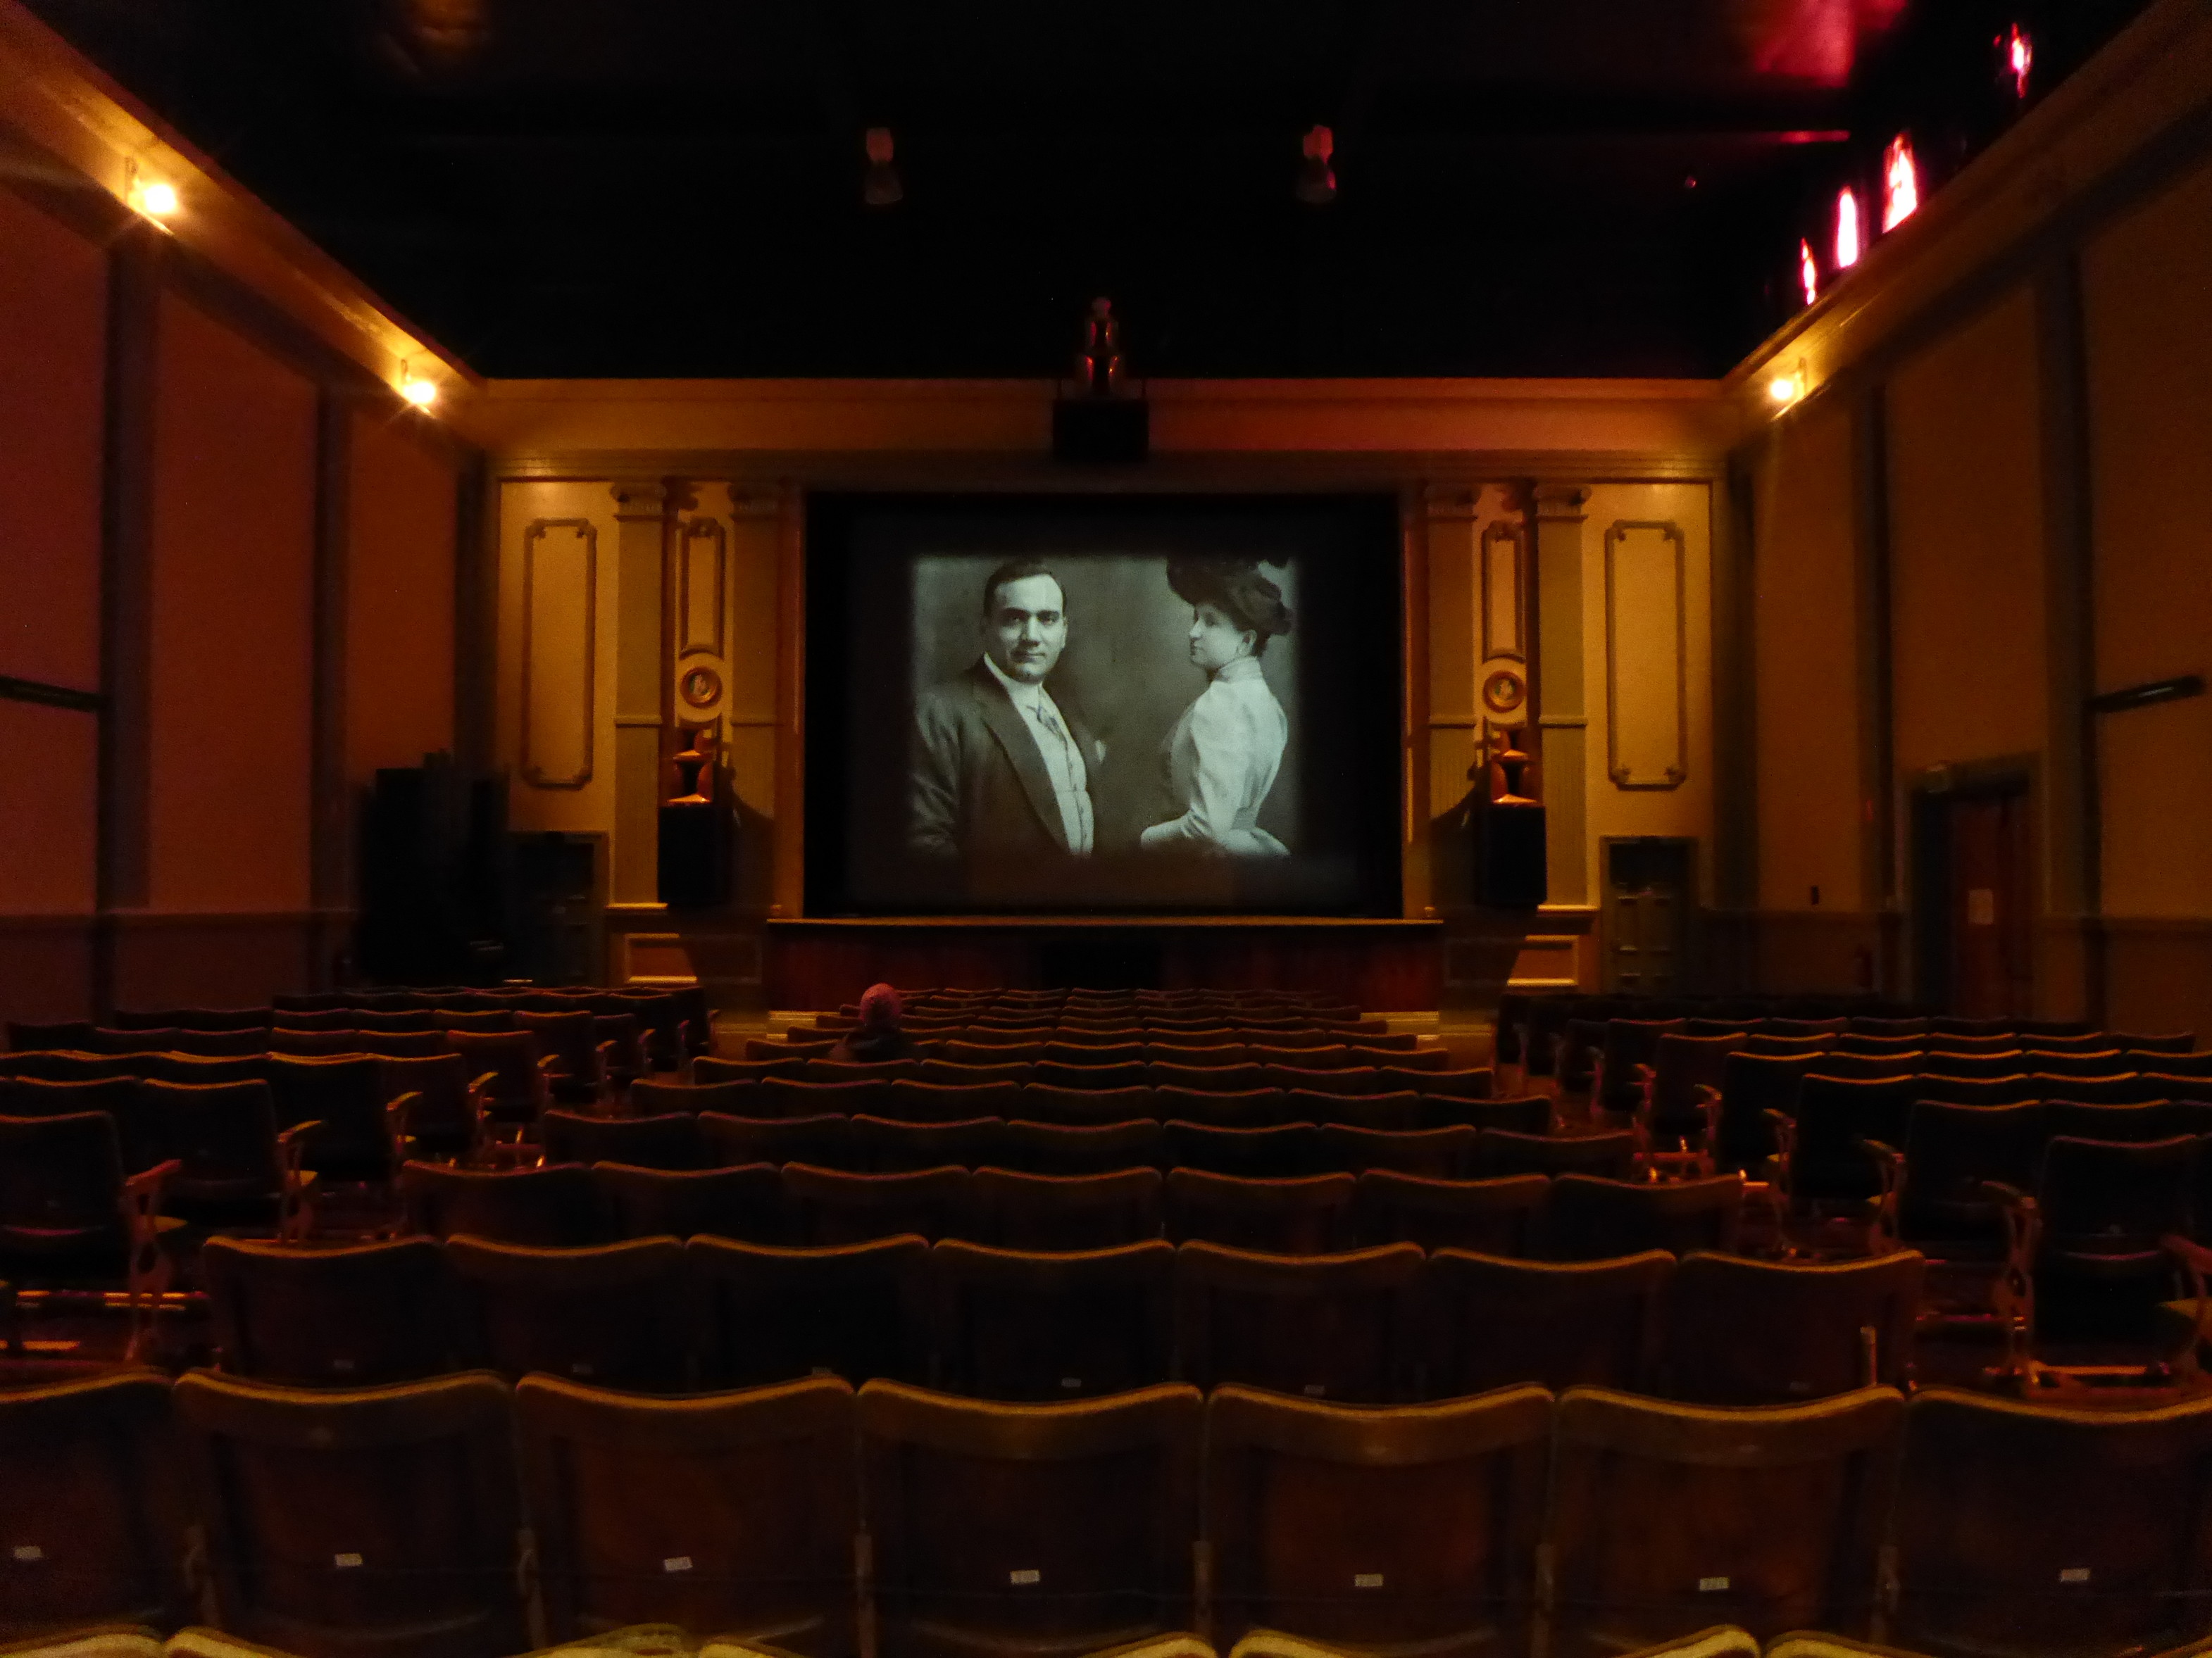 Interior of a person on their own seating facing the screen in Gaiety Theatre, Zeehan.